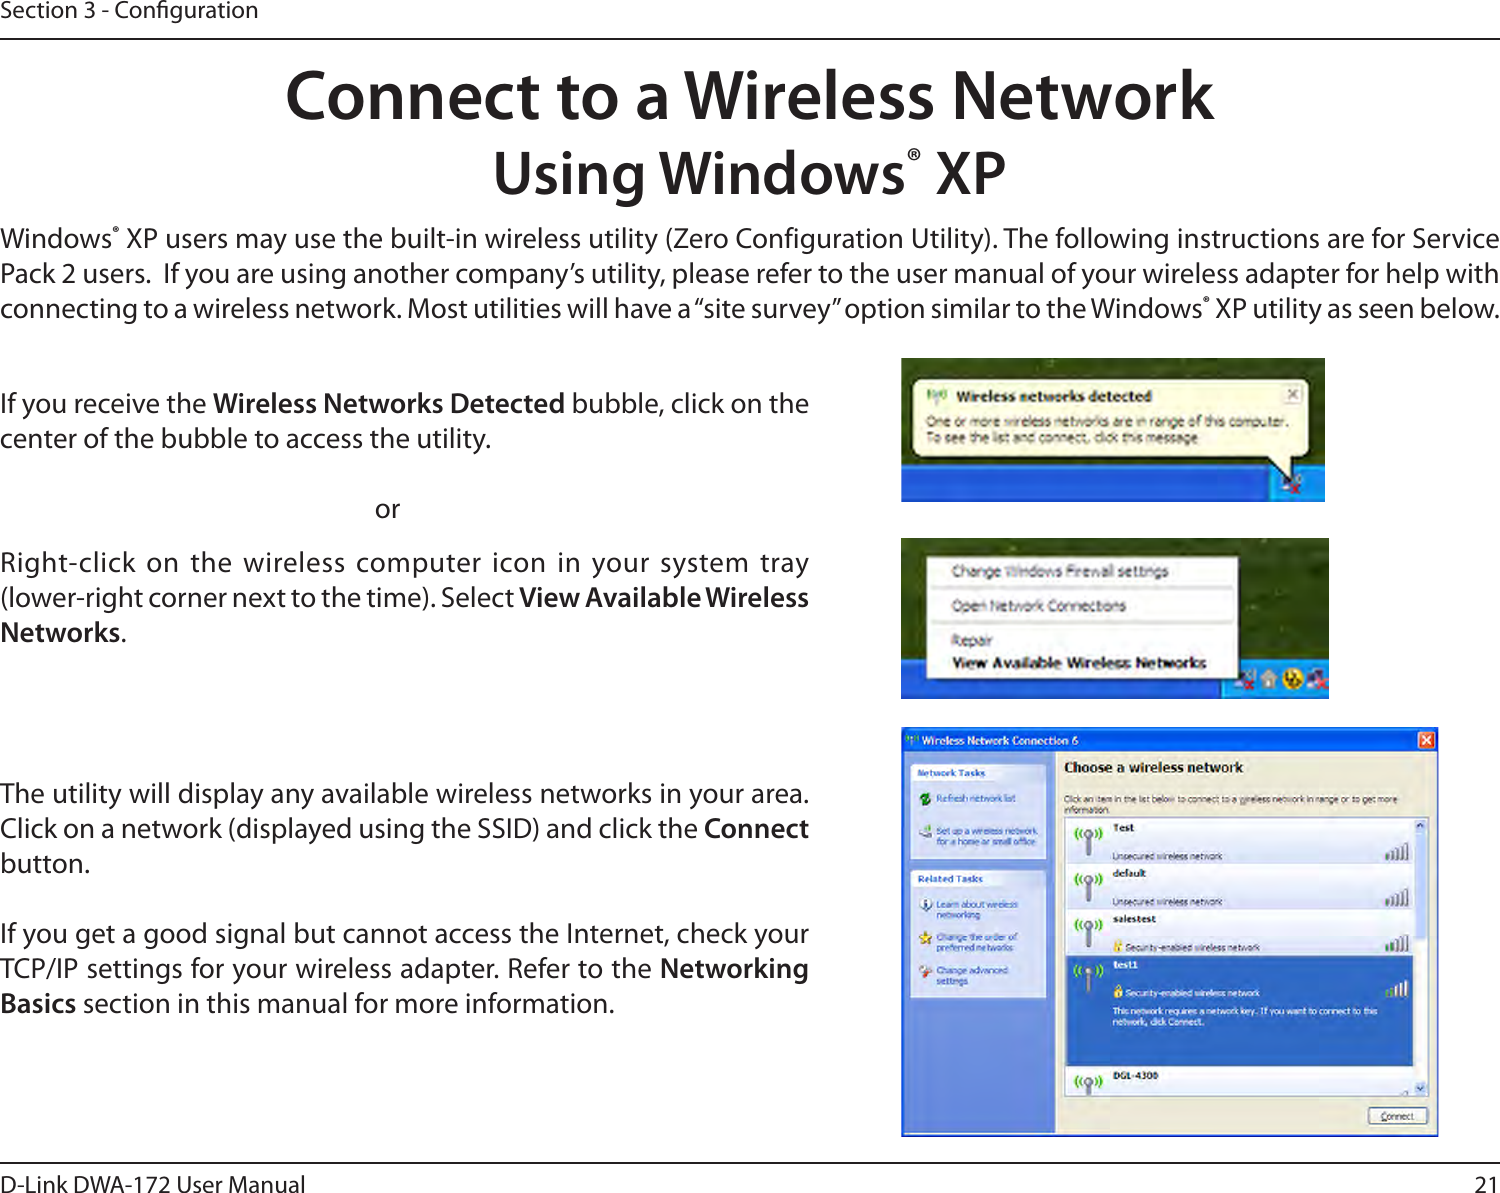 21D-Link DWA-172 User ManualSection 3 - CongurationConnect to a Wireless NetworkUsing Windows® XPWindows® XP users may use the built-in wireless utility (Zero Configuration Utility). The following instructions are for Service Pack 2 users.  If you are using another company’s utility, please refer to the user manual of your wireless adapter for help with connecting to a wireless network. Most utilities will have a “site survey” option similar to the Windows® XP utility as seen below.Right-click on the wireless computer icon in your system tray (lower-right corner next to the time). Select View Available Wireless Networks.If you receive the Wireless Networks Detected bubble, click on the center of the bubble to access the utility.     orThe utility will display any available wireless networks in your area. Click on a network (displayed using the SSID) and click the Connect button.If you get a good signal but cannot access the Internet, check your TCP/IP settings for your wireless adapter. Refer to the Networking Basics section in this manual for more information.